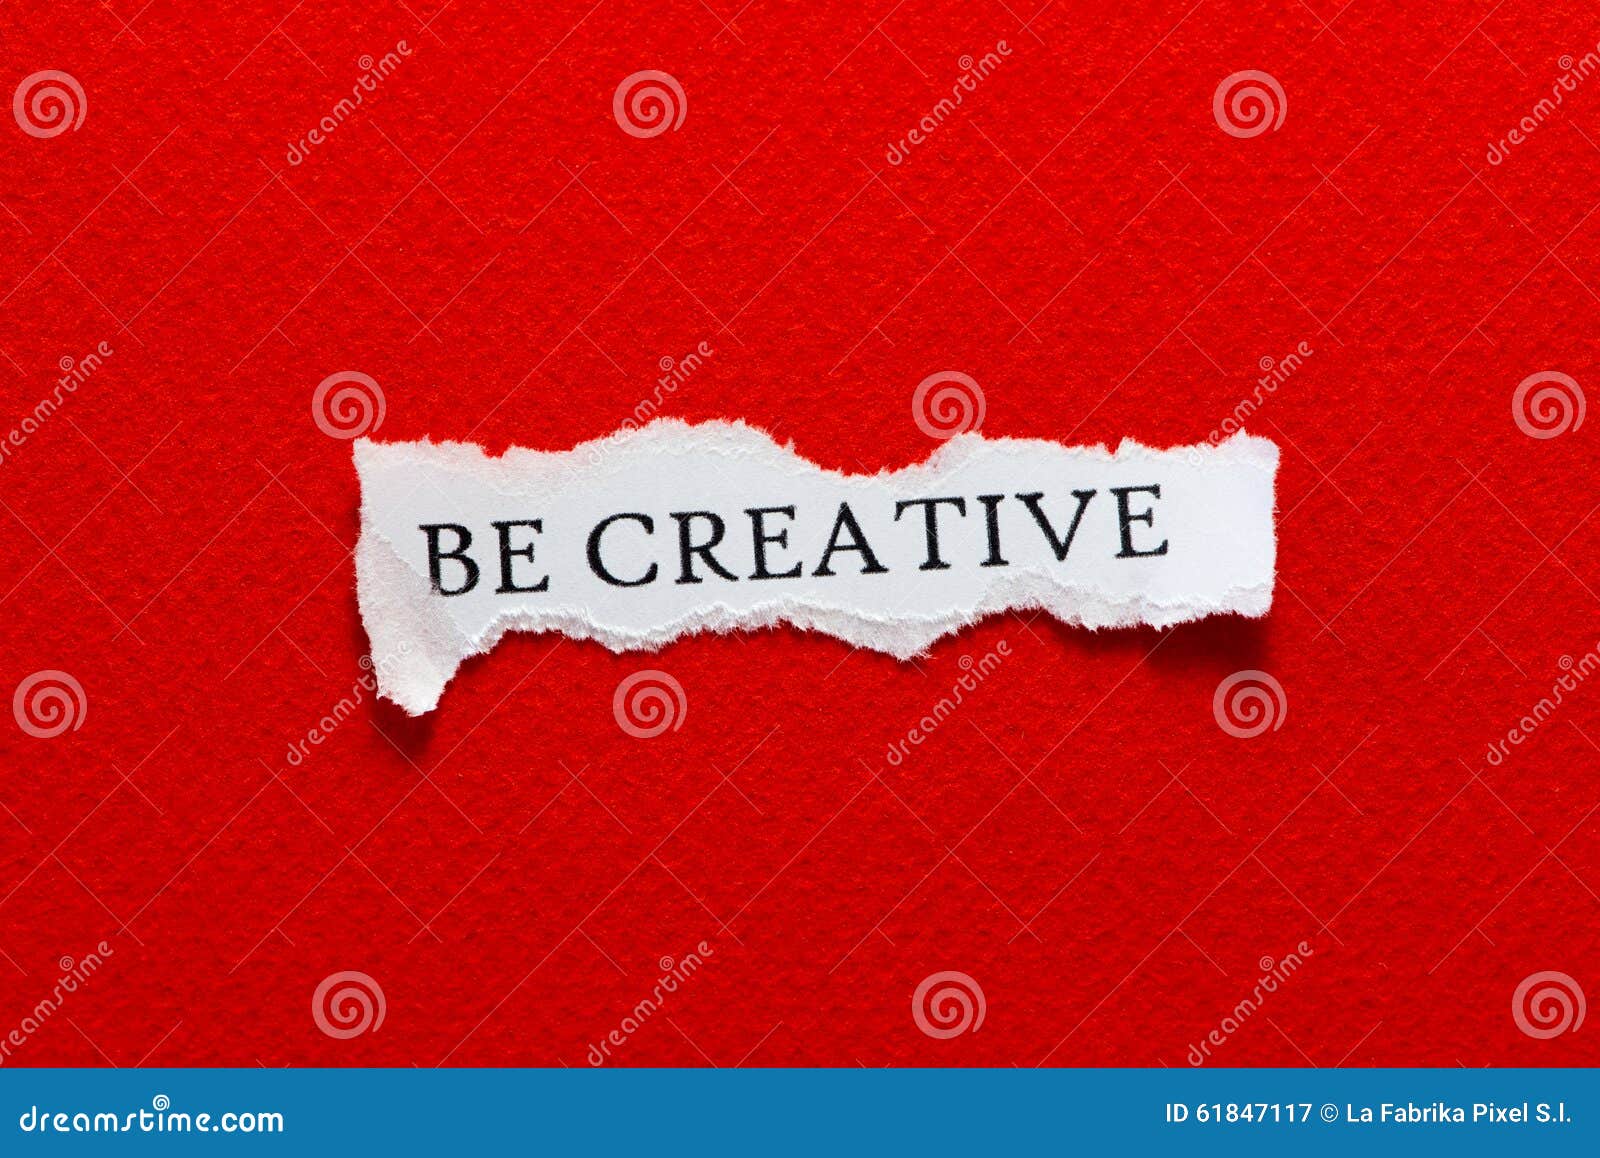 be creative paper